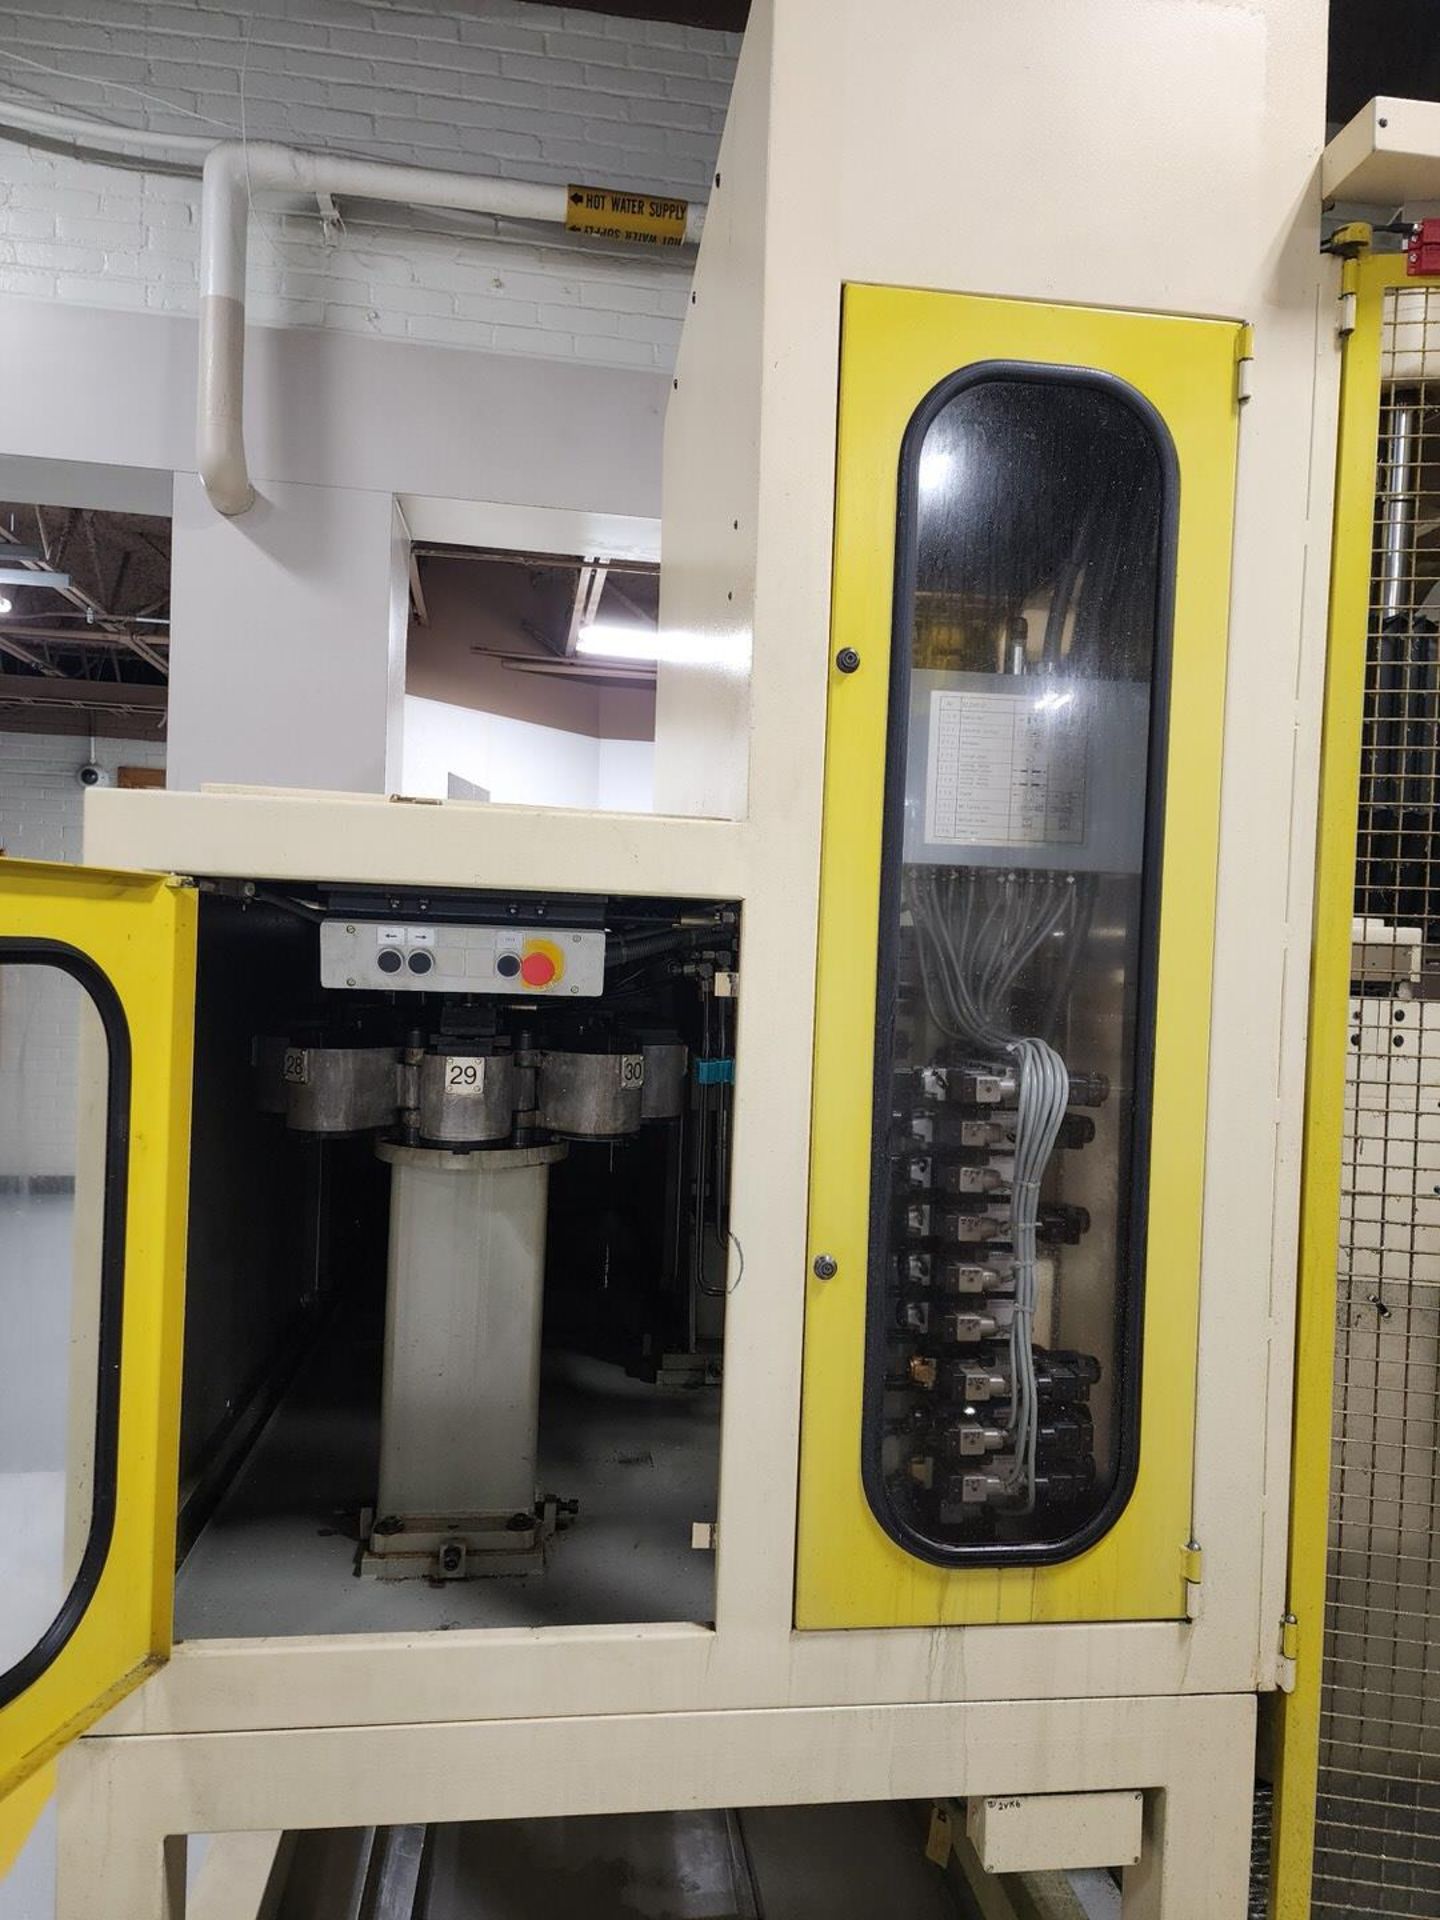 SIP SIP-640 Jig Boring Machine W/ Fanuc Series 16i-M Controller; Cutting Time: 15,304hrs - Image 22 of 36